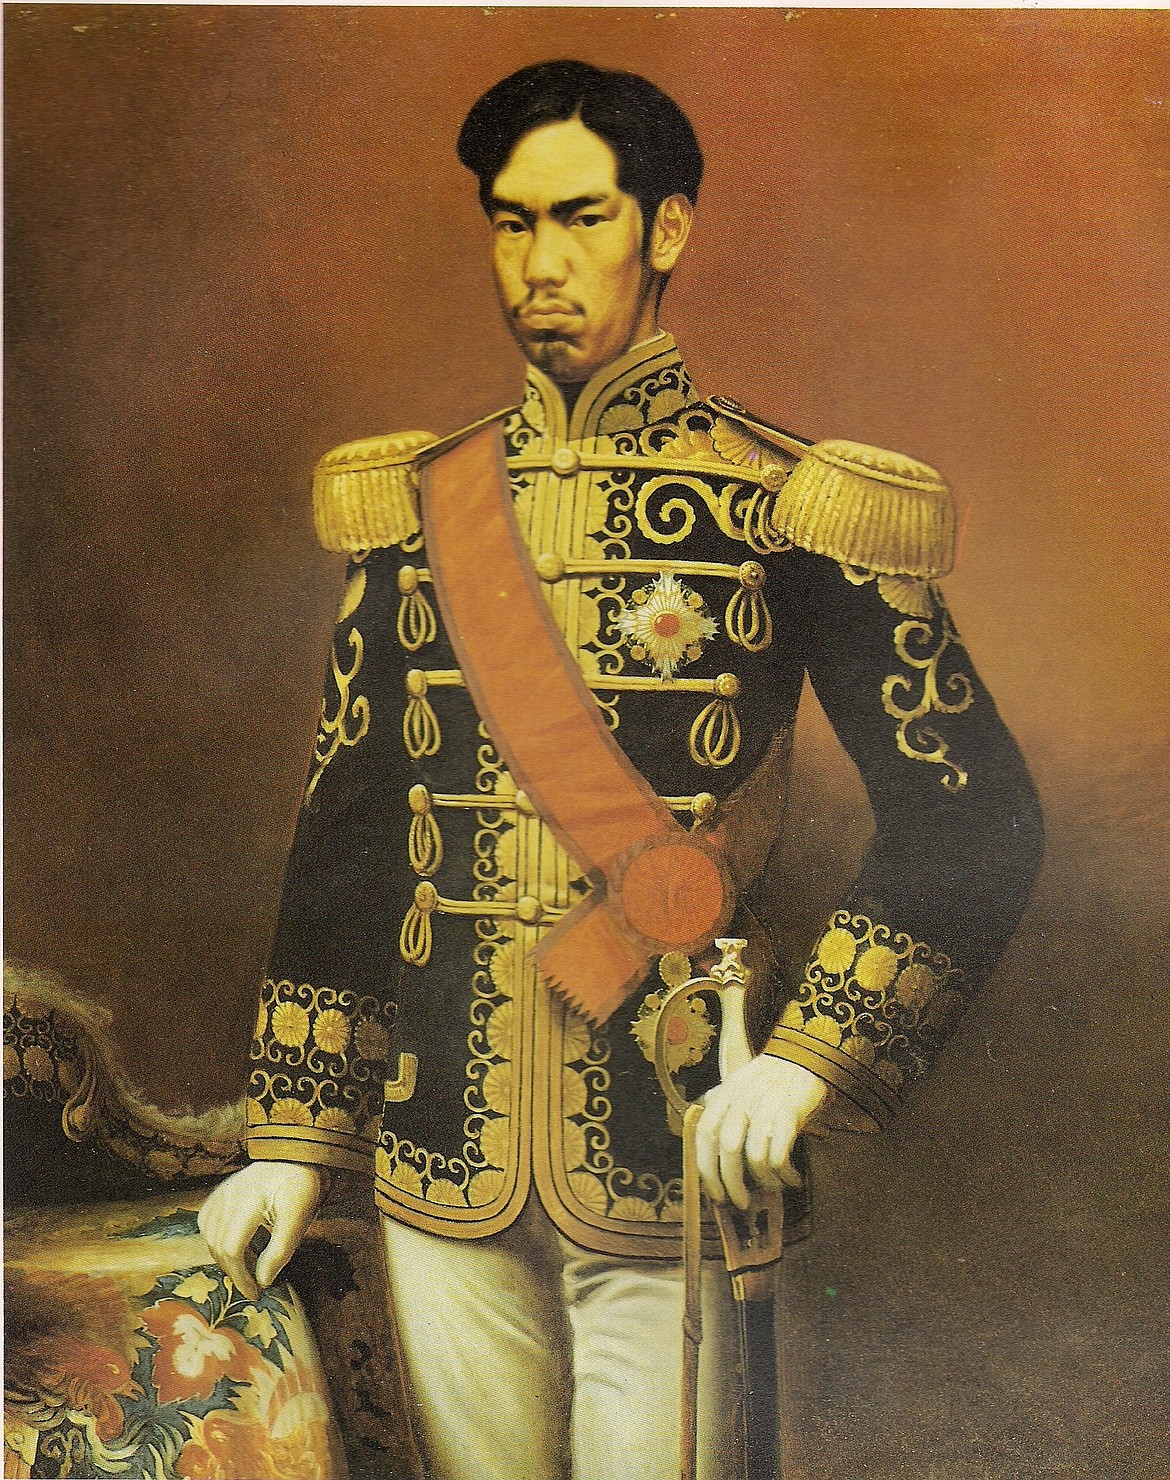 Painting by Takahashi Yuichi of Emperor Meiji (1852-1912) who brought Japan out of the feudal samurai era into the Modern Age.